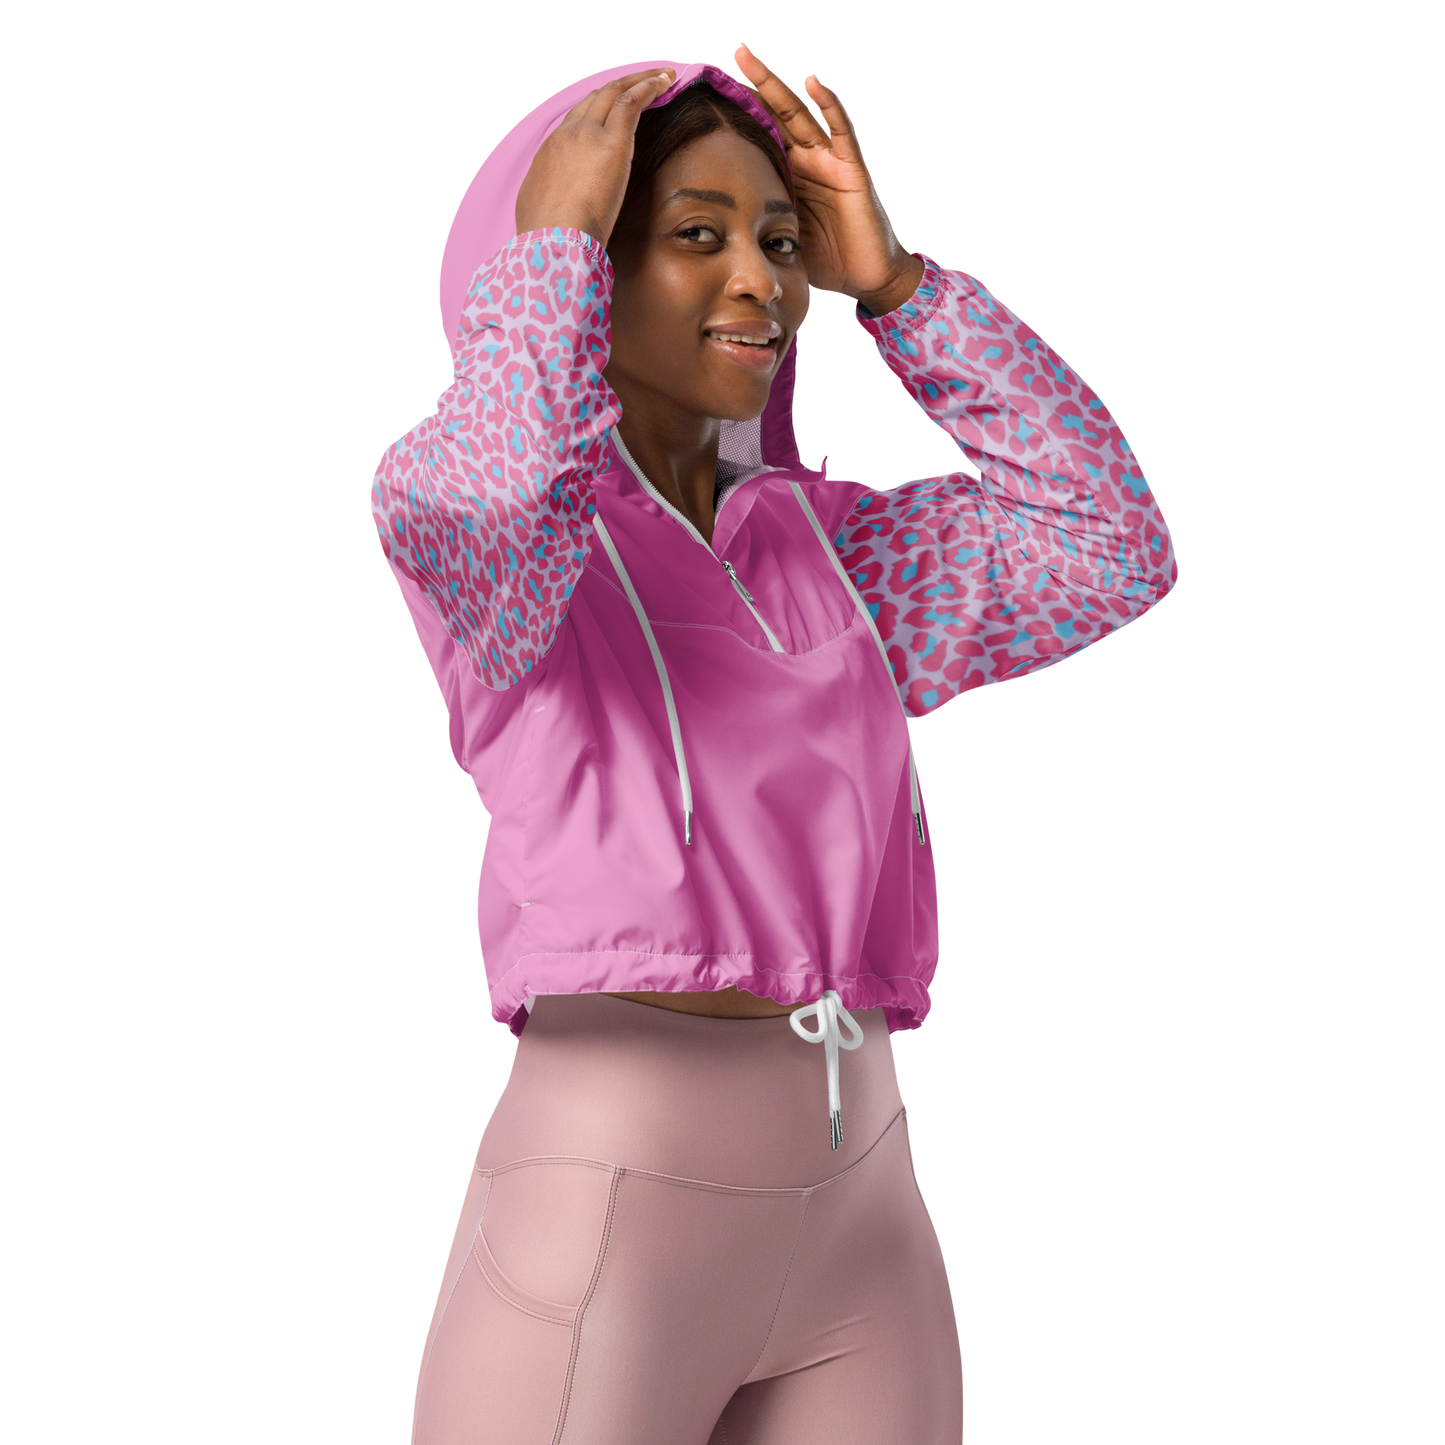 Load image into Gallery viewer, Pink Leopard Cropped Wind Breaker
